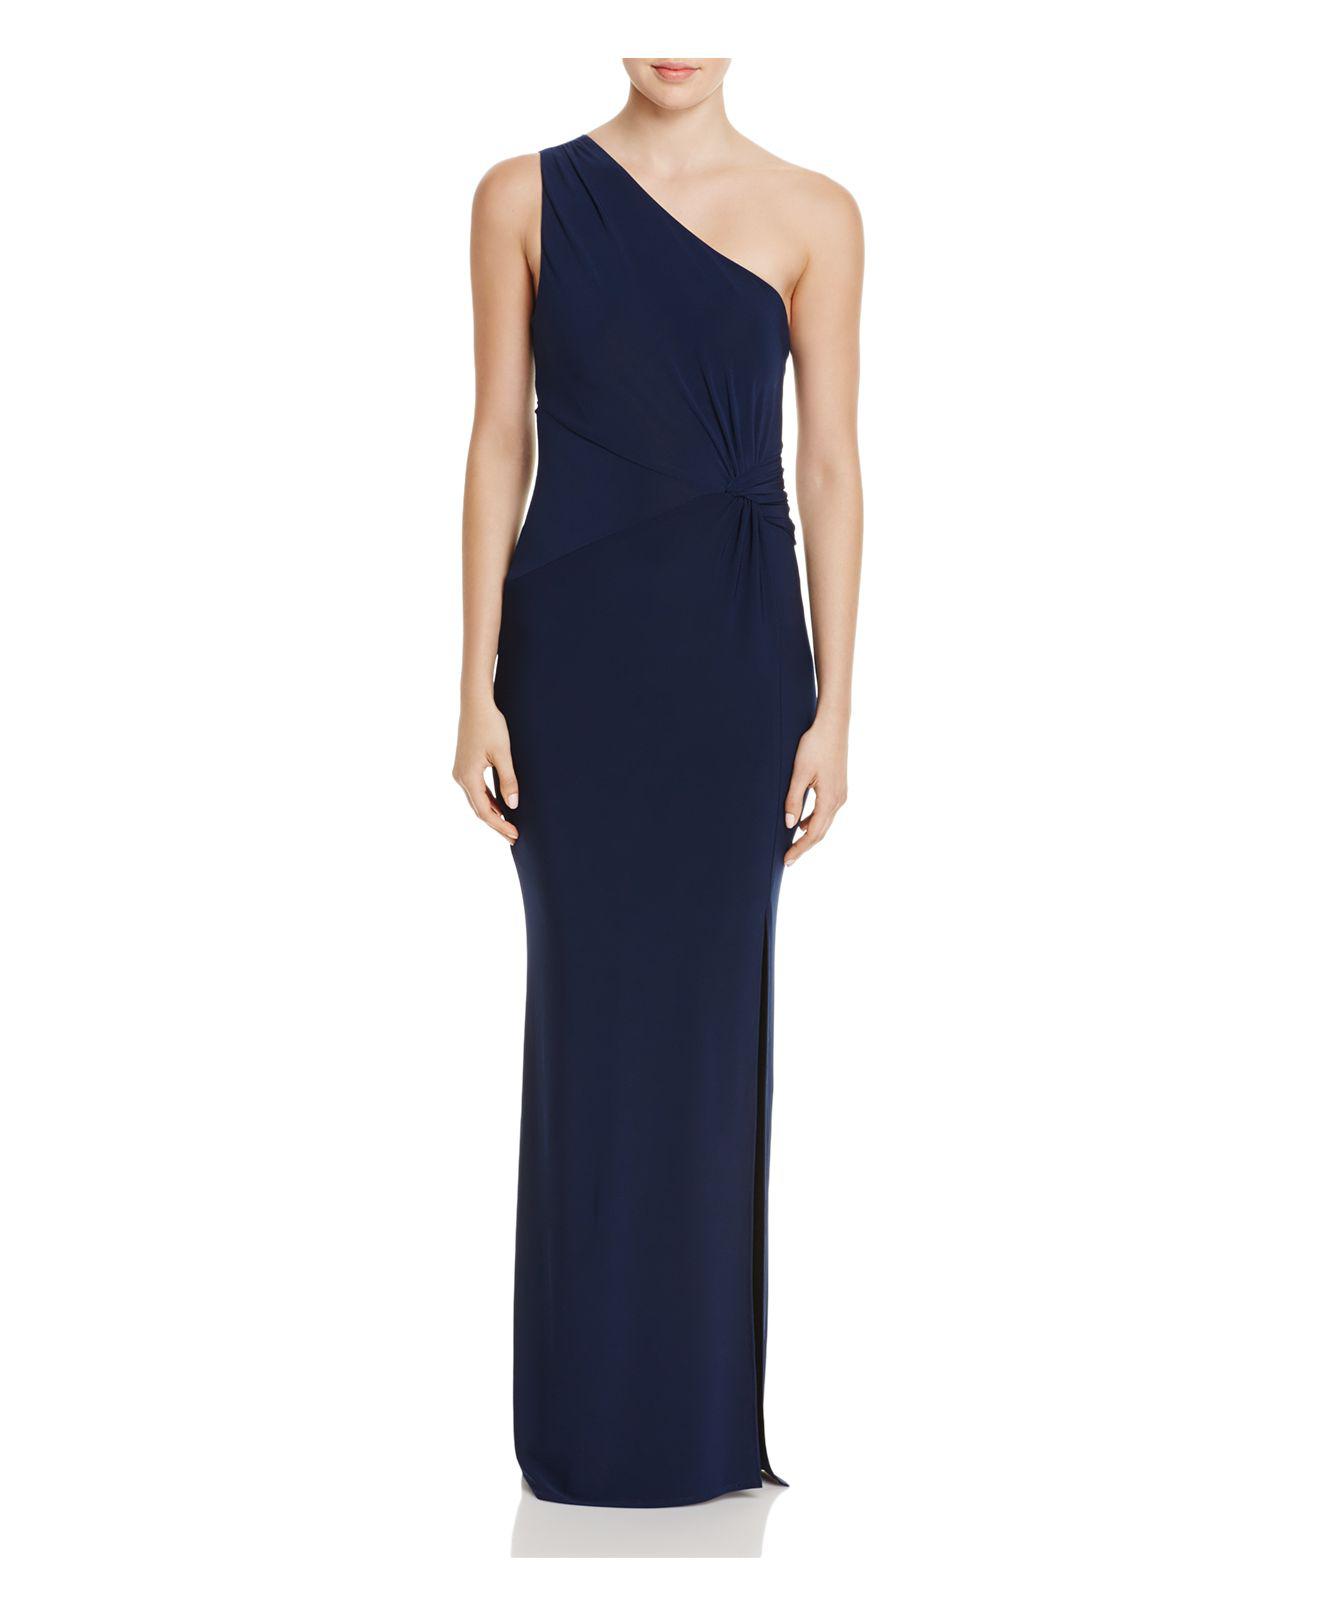 Lyst - Laundry By Shelli Segal One-shoulder Jersey Gown in Blue